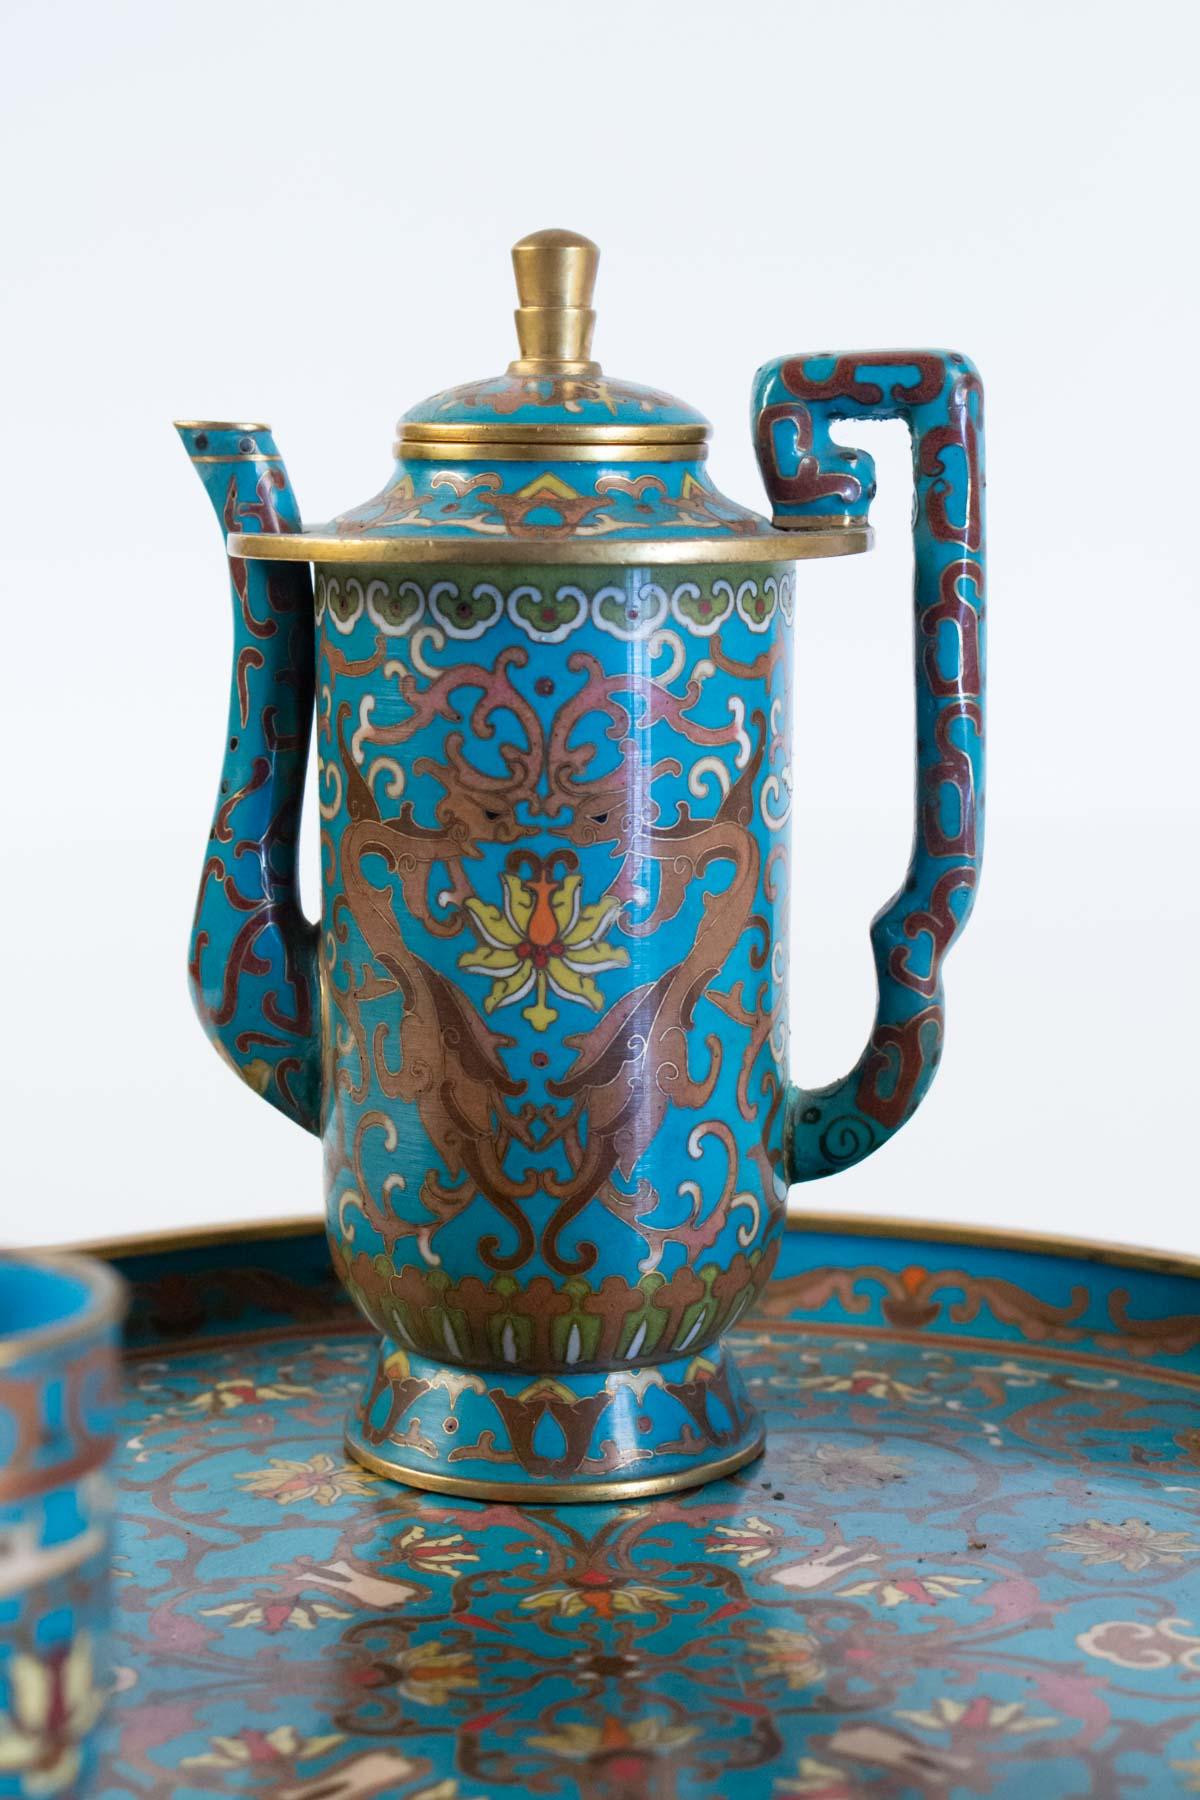 Enameled Plateau, China, Antiquity, Decorated with Cloisonné Emaux